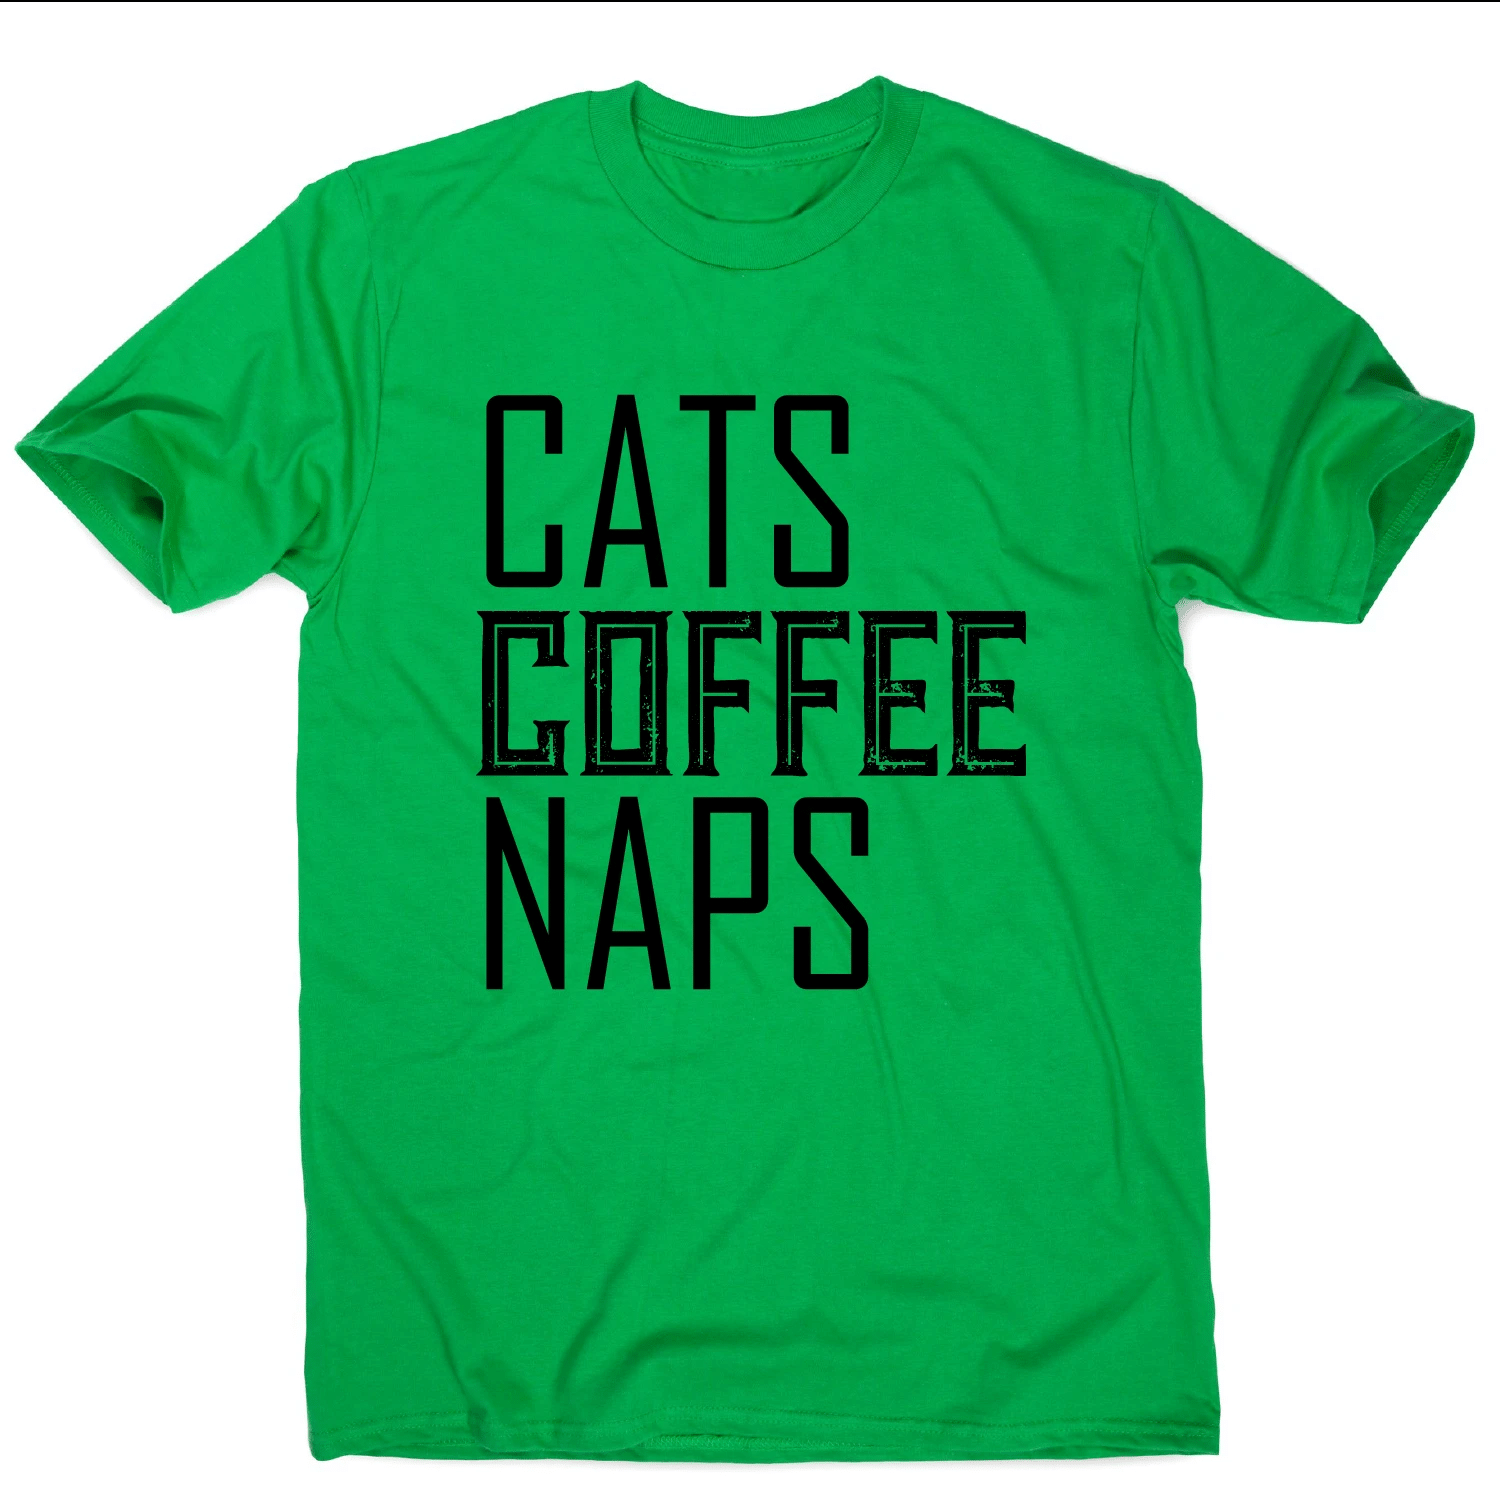 Cats coffee naps awesome funny slogan t-shirt men's